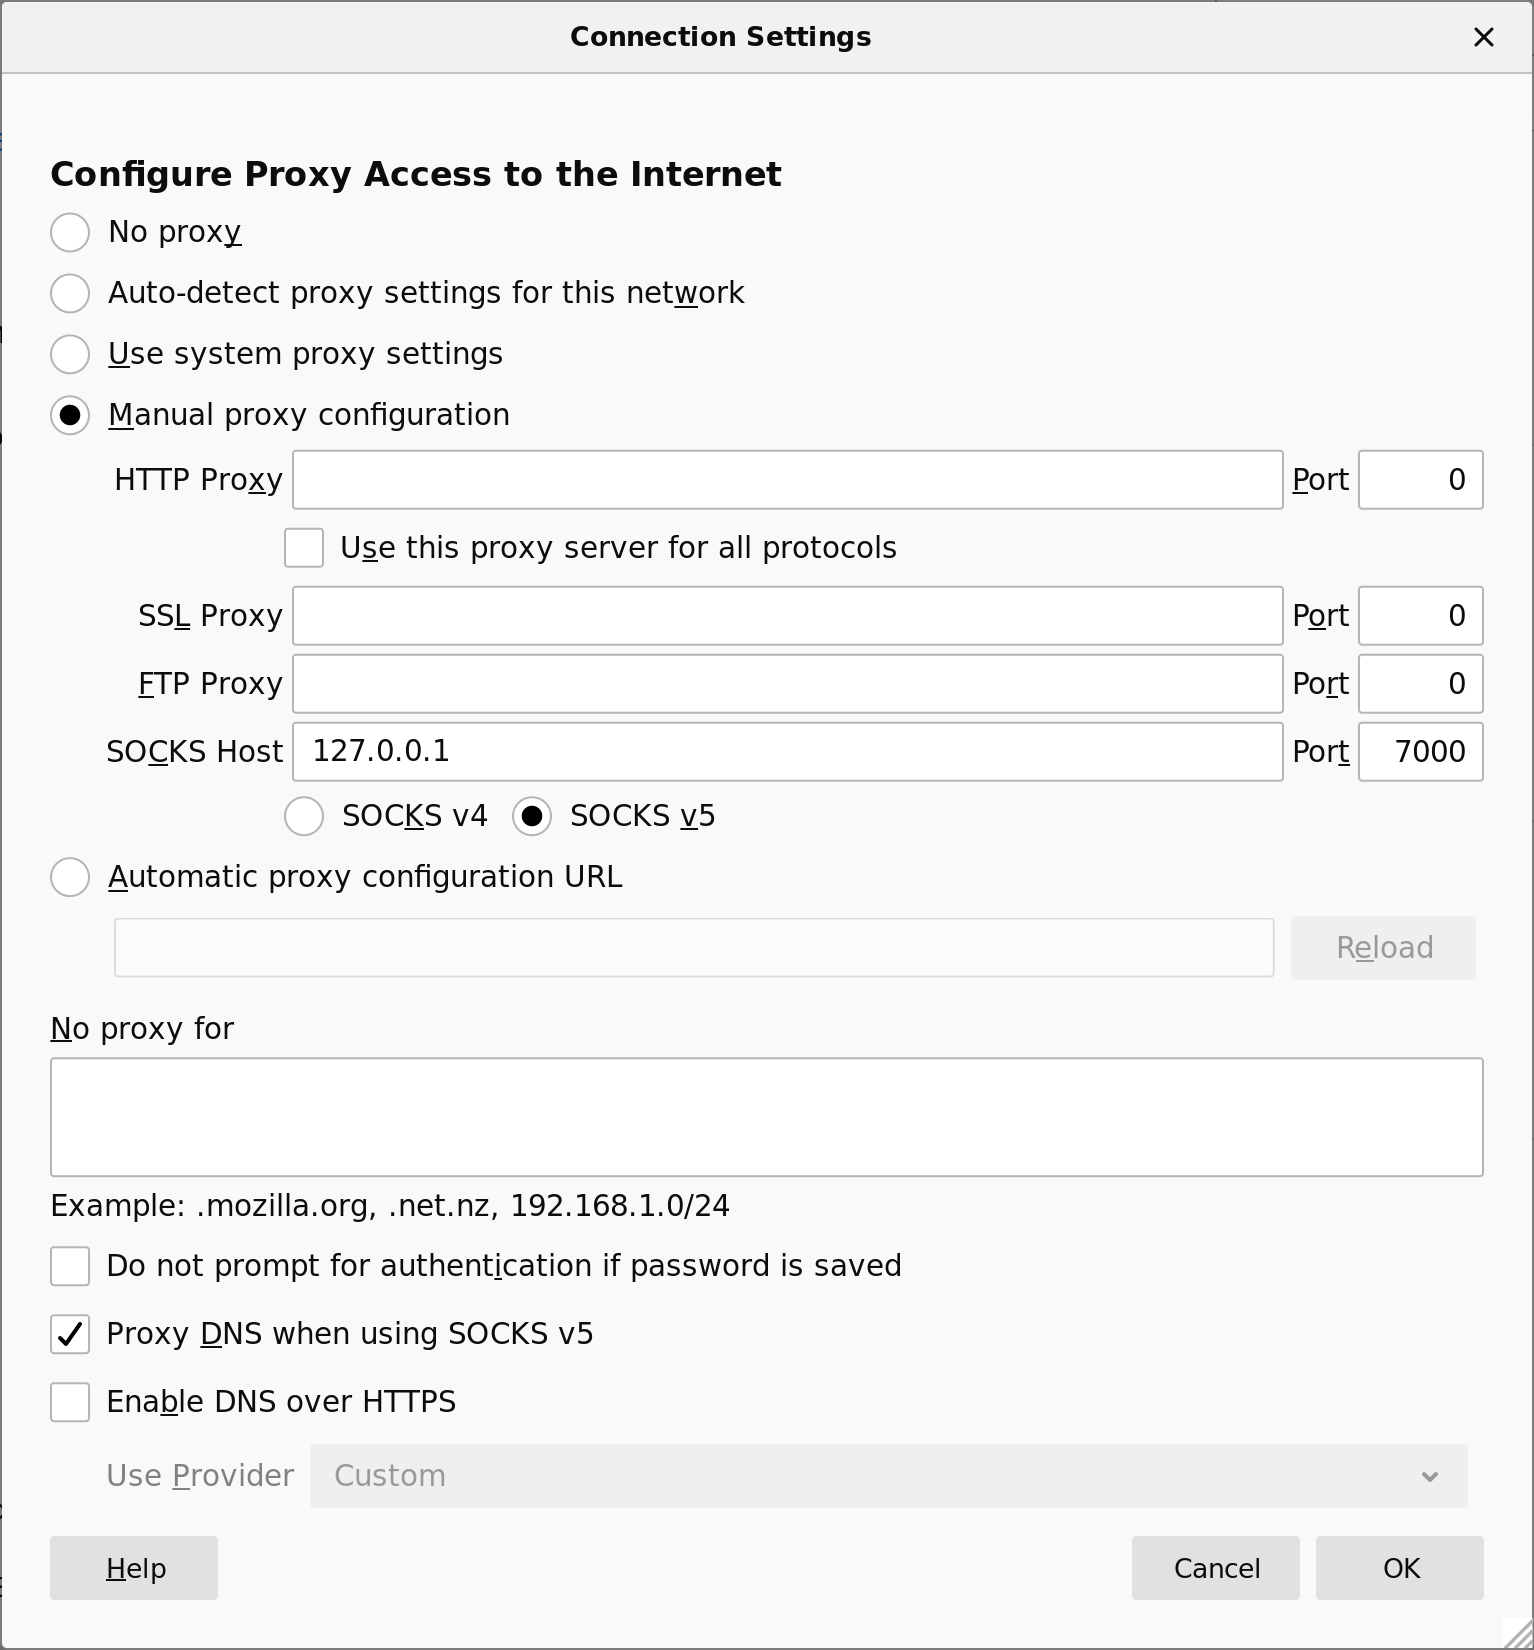 A screenshot of the Connection Settings dialog in Firefox 68.7.0esr.
      The "Manual proxy configuration" radio button is selected, with
      "SOCKS Host: 127.0.0.1", "Port: 7000", and
      "SOCKS v5" selected.
      "Proxy DNS when using SOCKS v5" is checked.